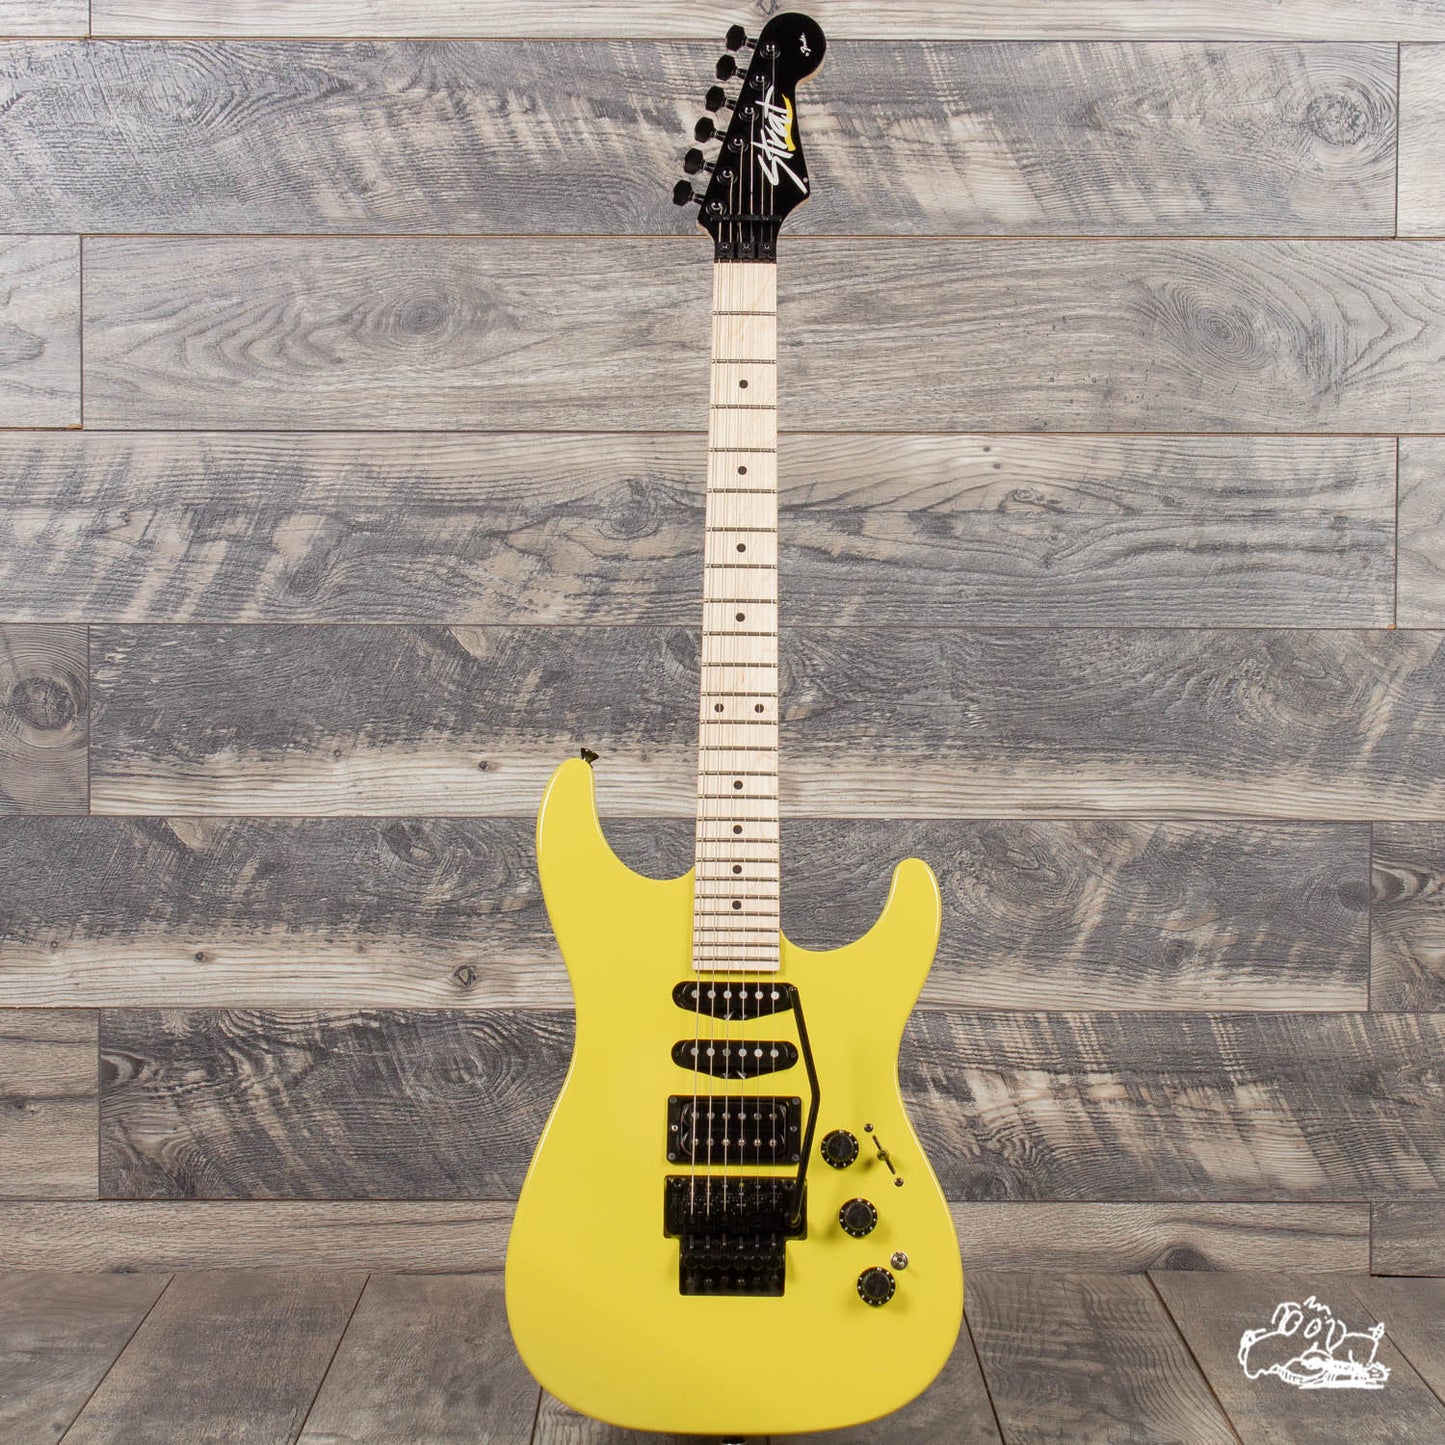 2019 Limited Edition HM Strat®, Maple Fingerboard, Frozen Yellow - Make an Offer